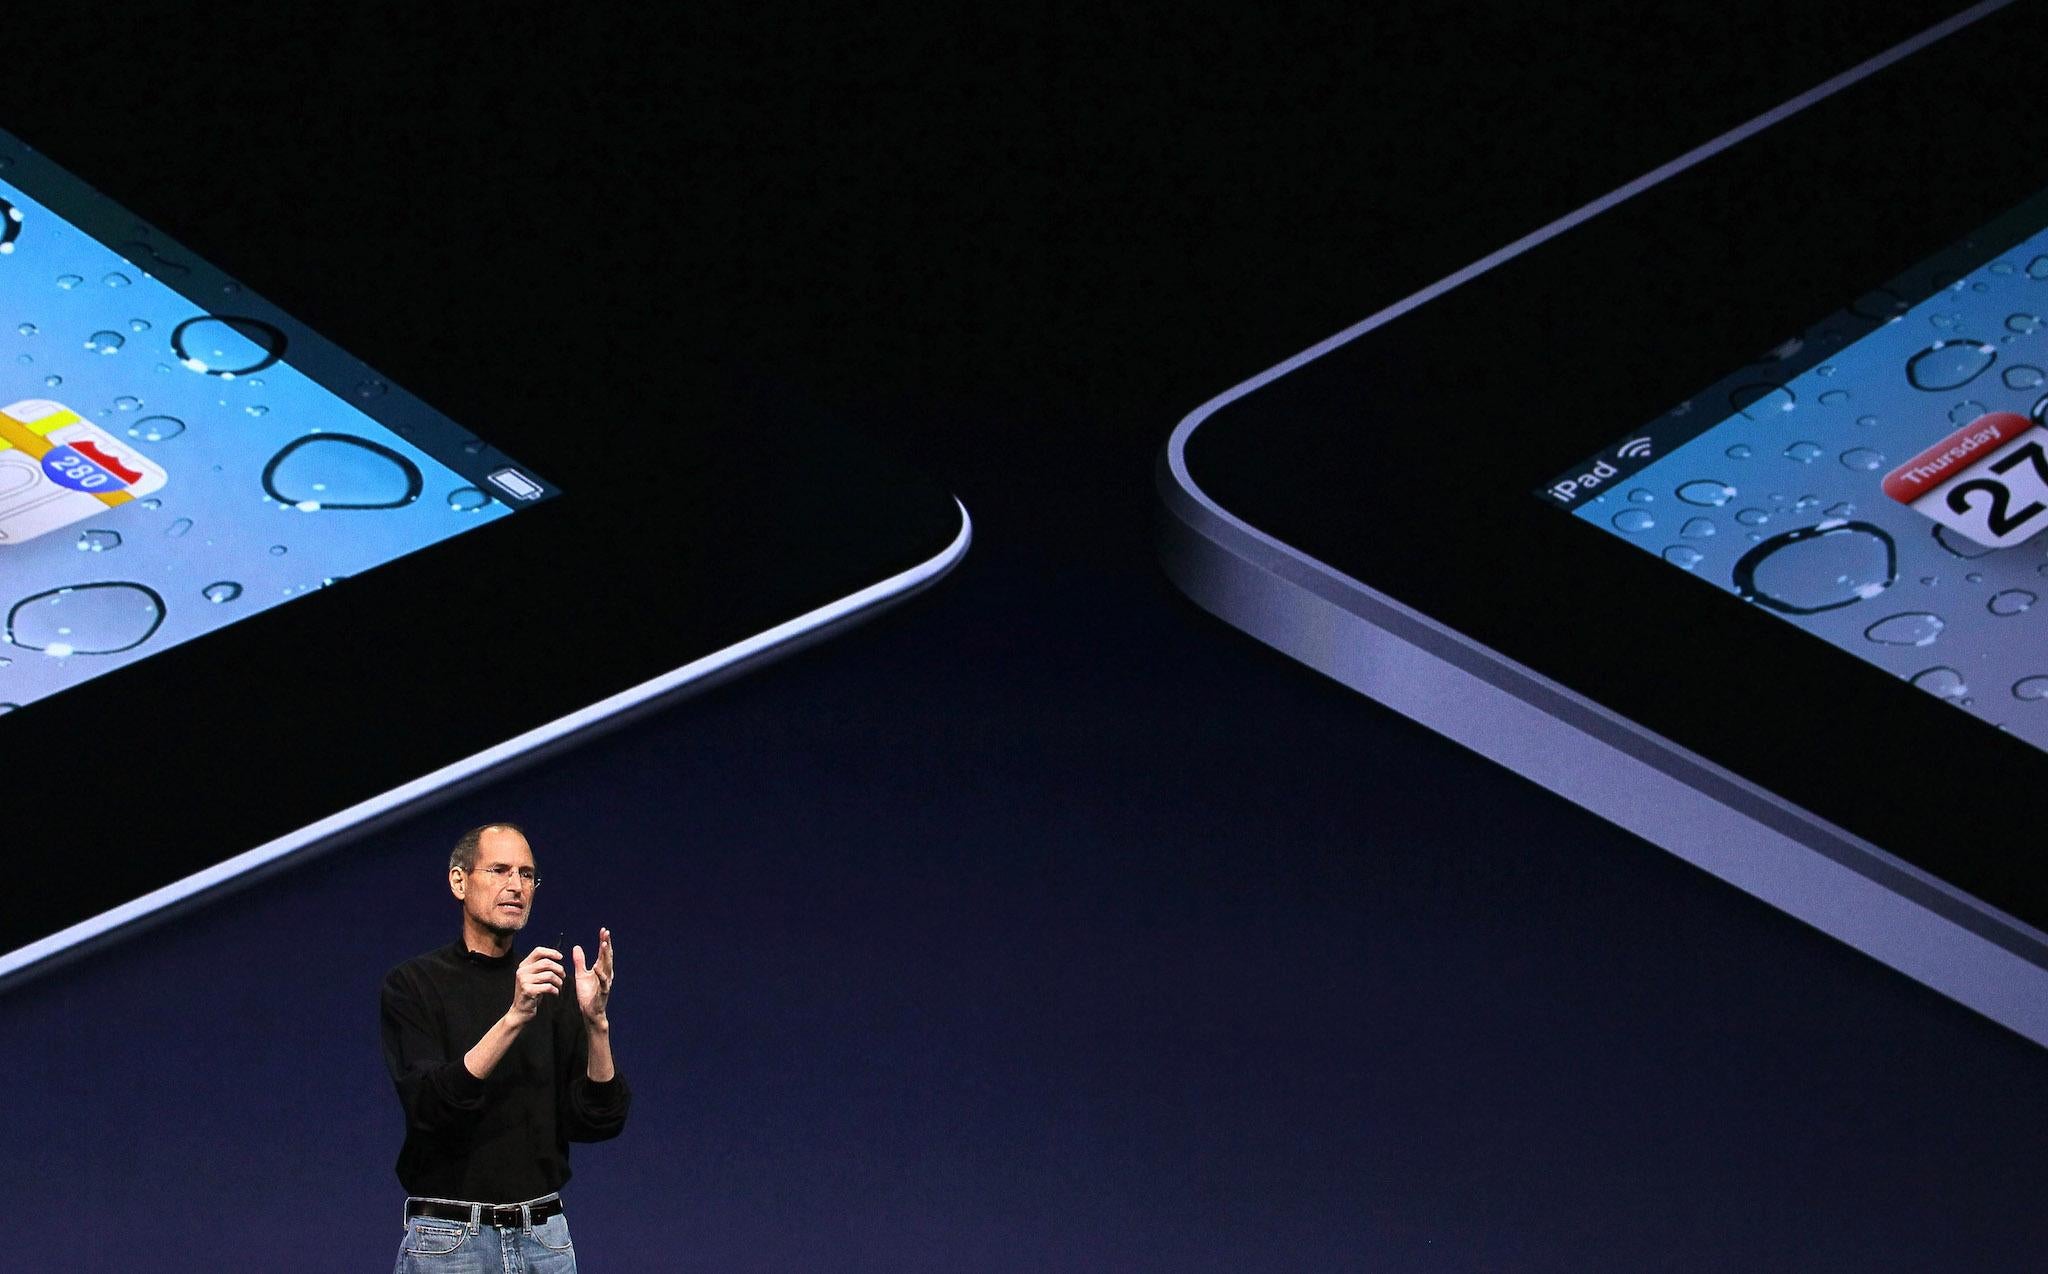 Apple CEO Steve Jobs announces the new iPad 2 during an Apple Special event on March 2, 2011 in San Francisco, California